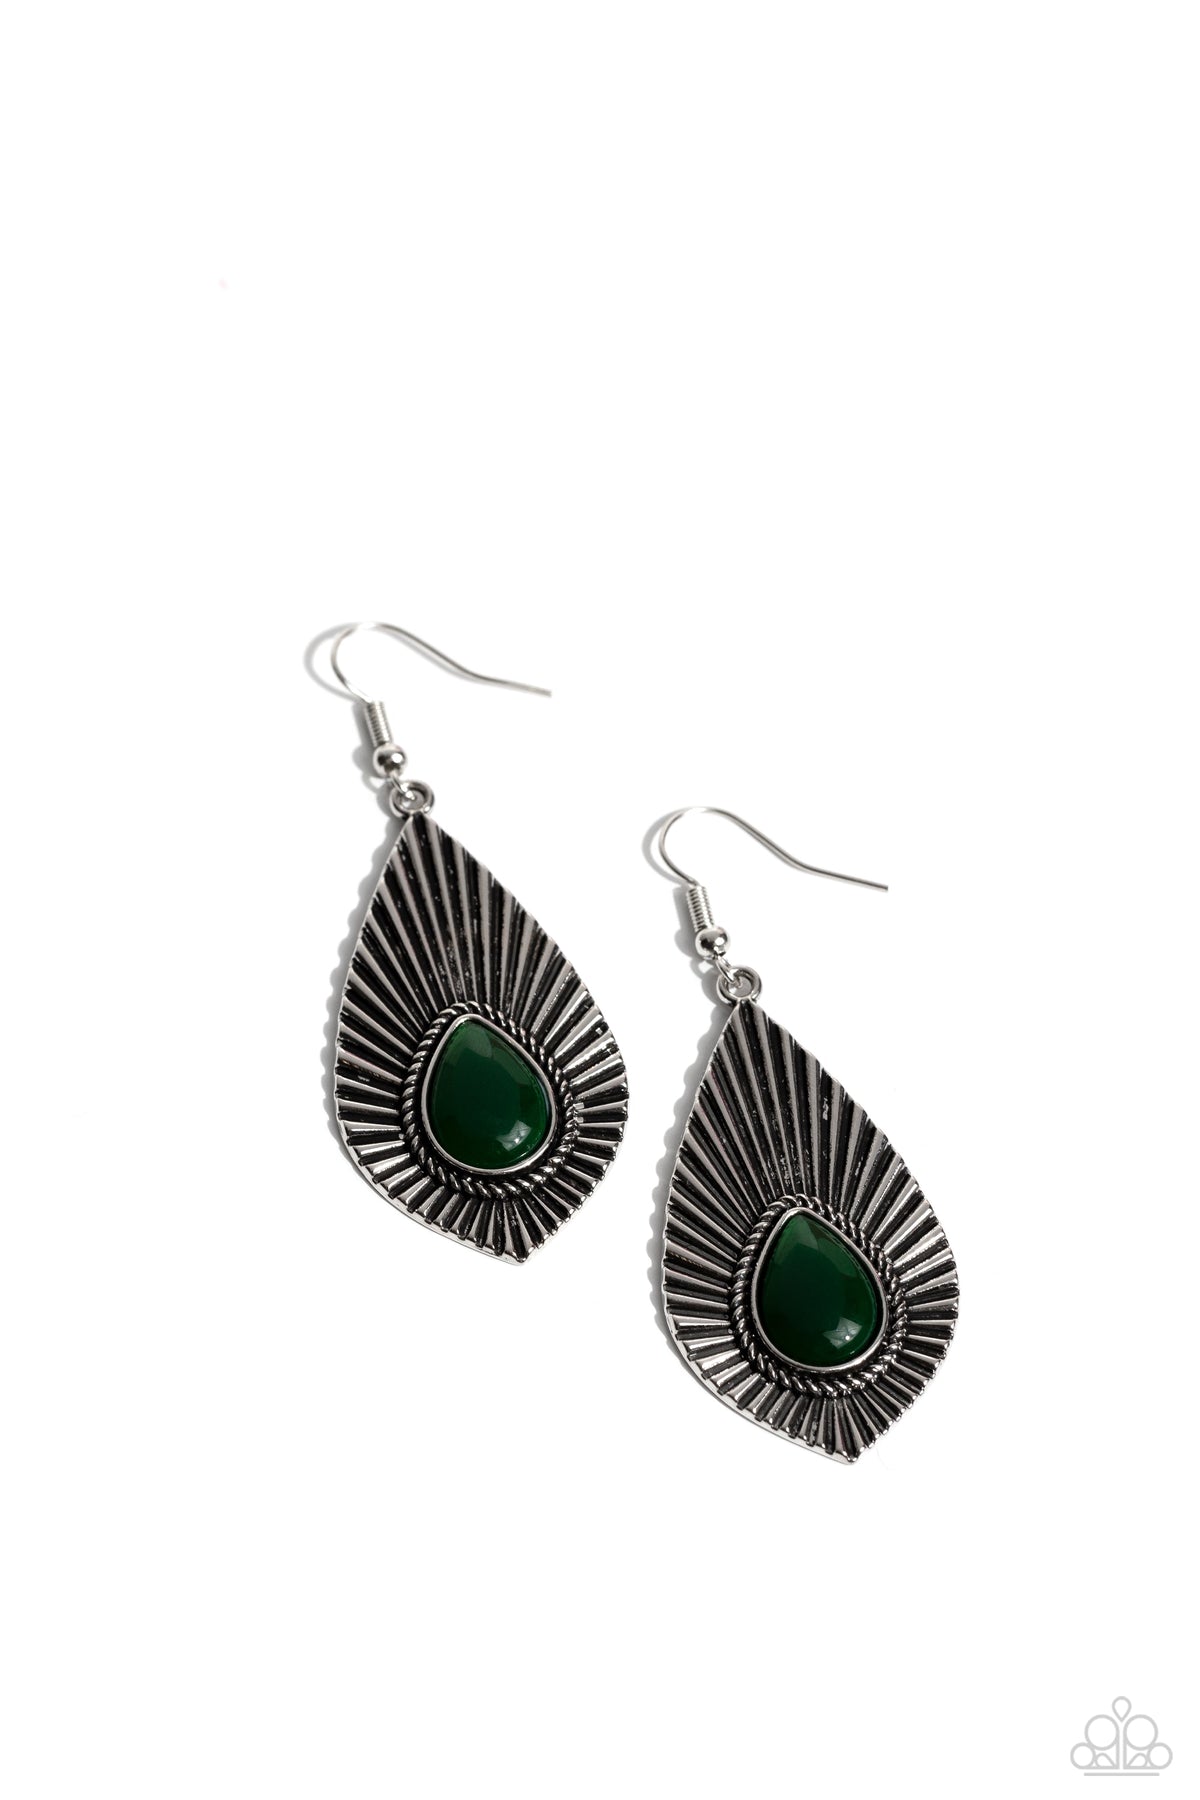 SOUL-ar Flare Green Earrings - Paparazzi Accessories- lightbox - CarasShop.com - $5 Jewelry by Cara Jewels